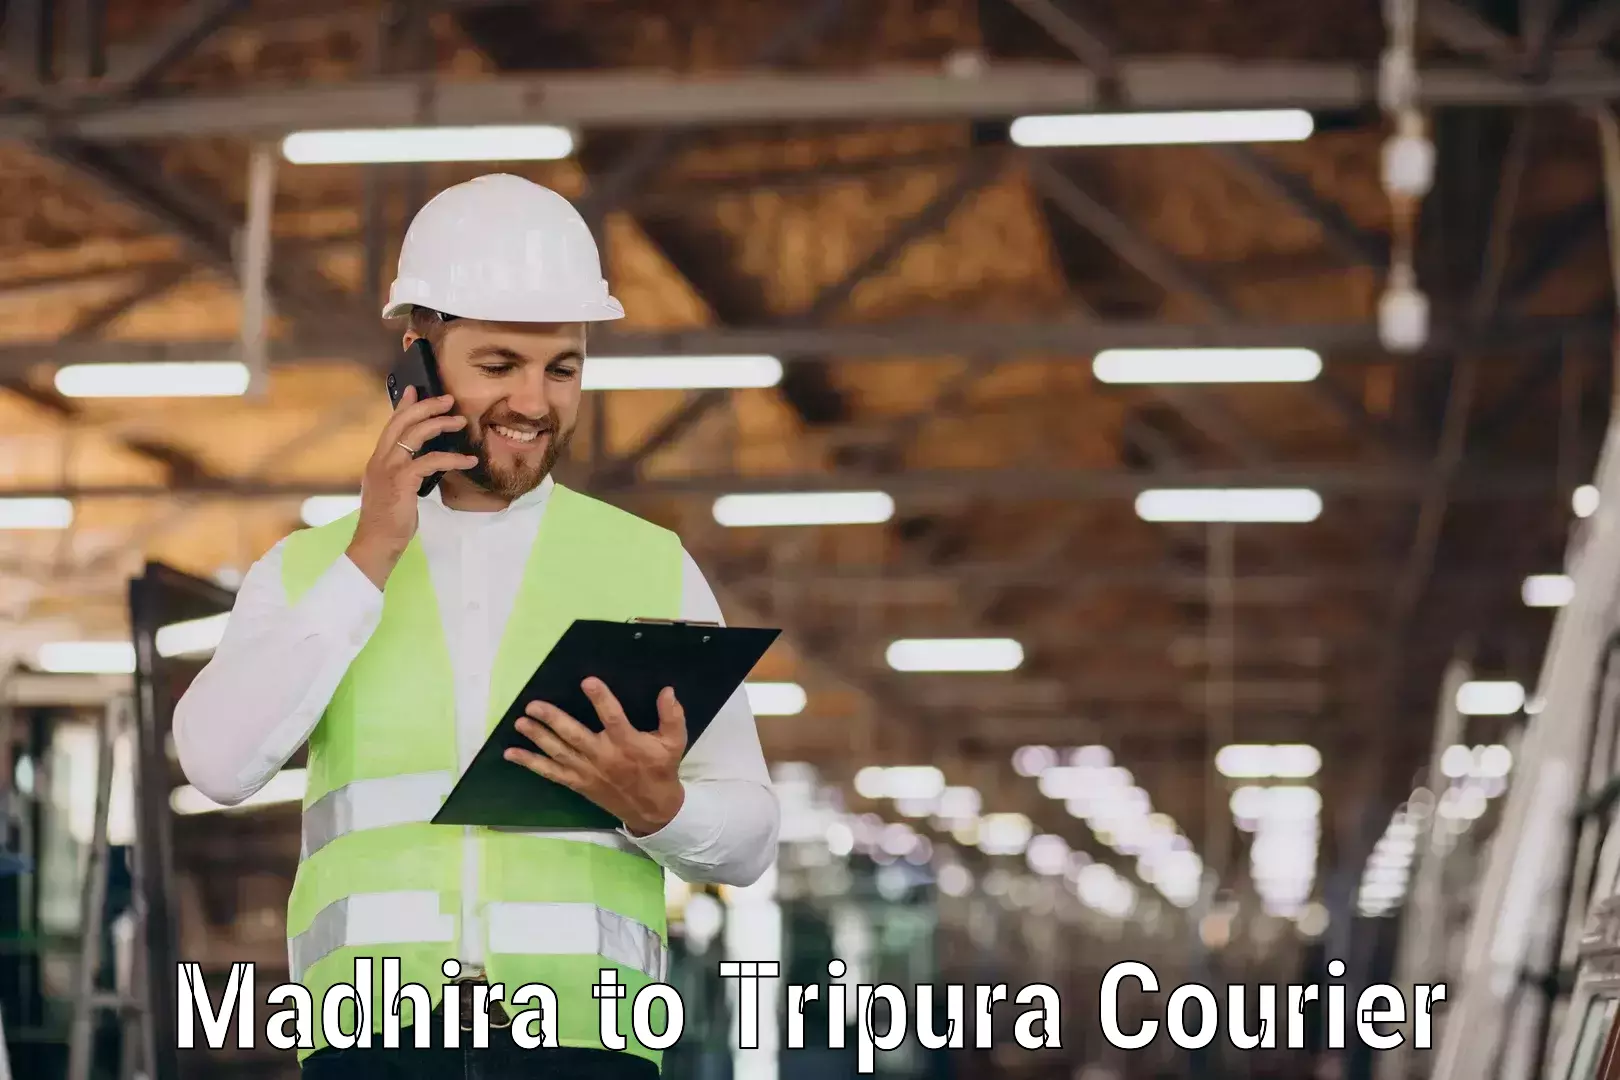 Reliable delivery network Madhira to Tripura